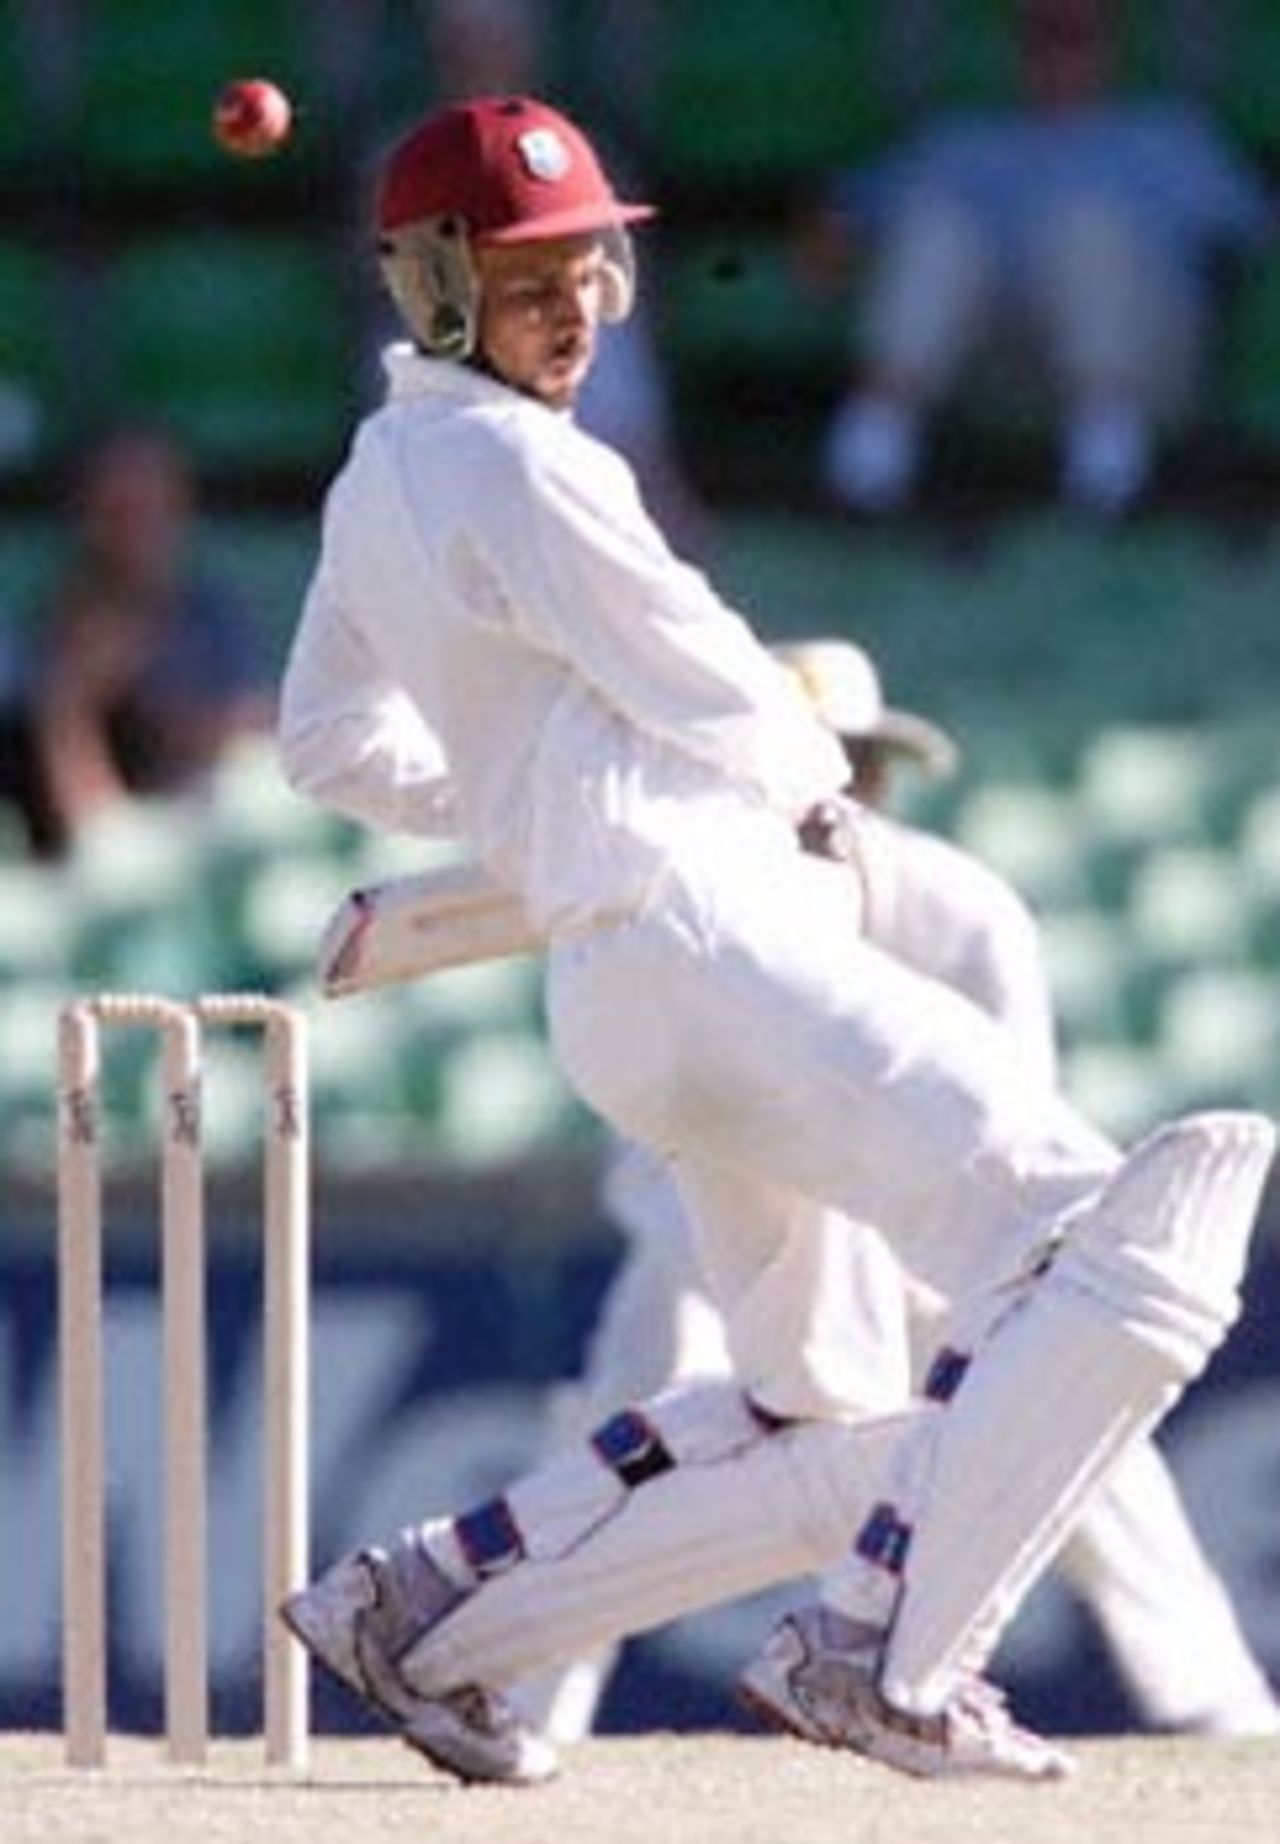 West Indies captain Jimmy Adams sways away from a bouncer during a four day match against the Western Warriors at the WACA ground in Perth 11 November 2000. The West Indies are currently on 6-266 at stumps on day three, with Adams not out on 41.